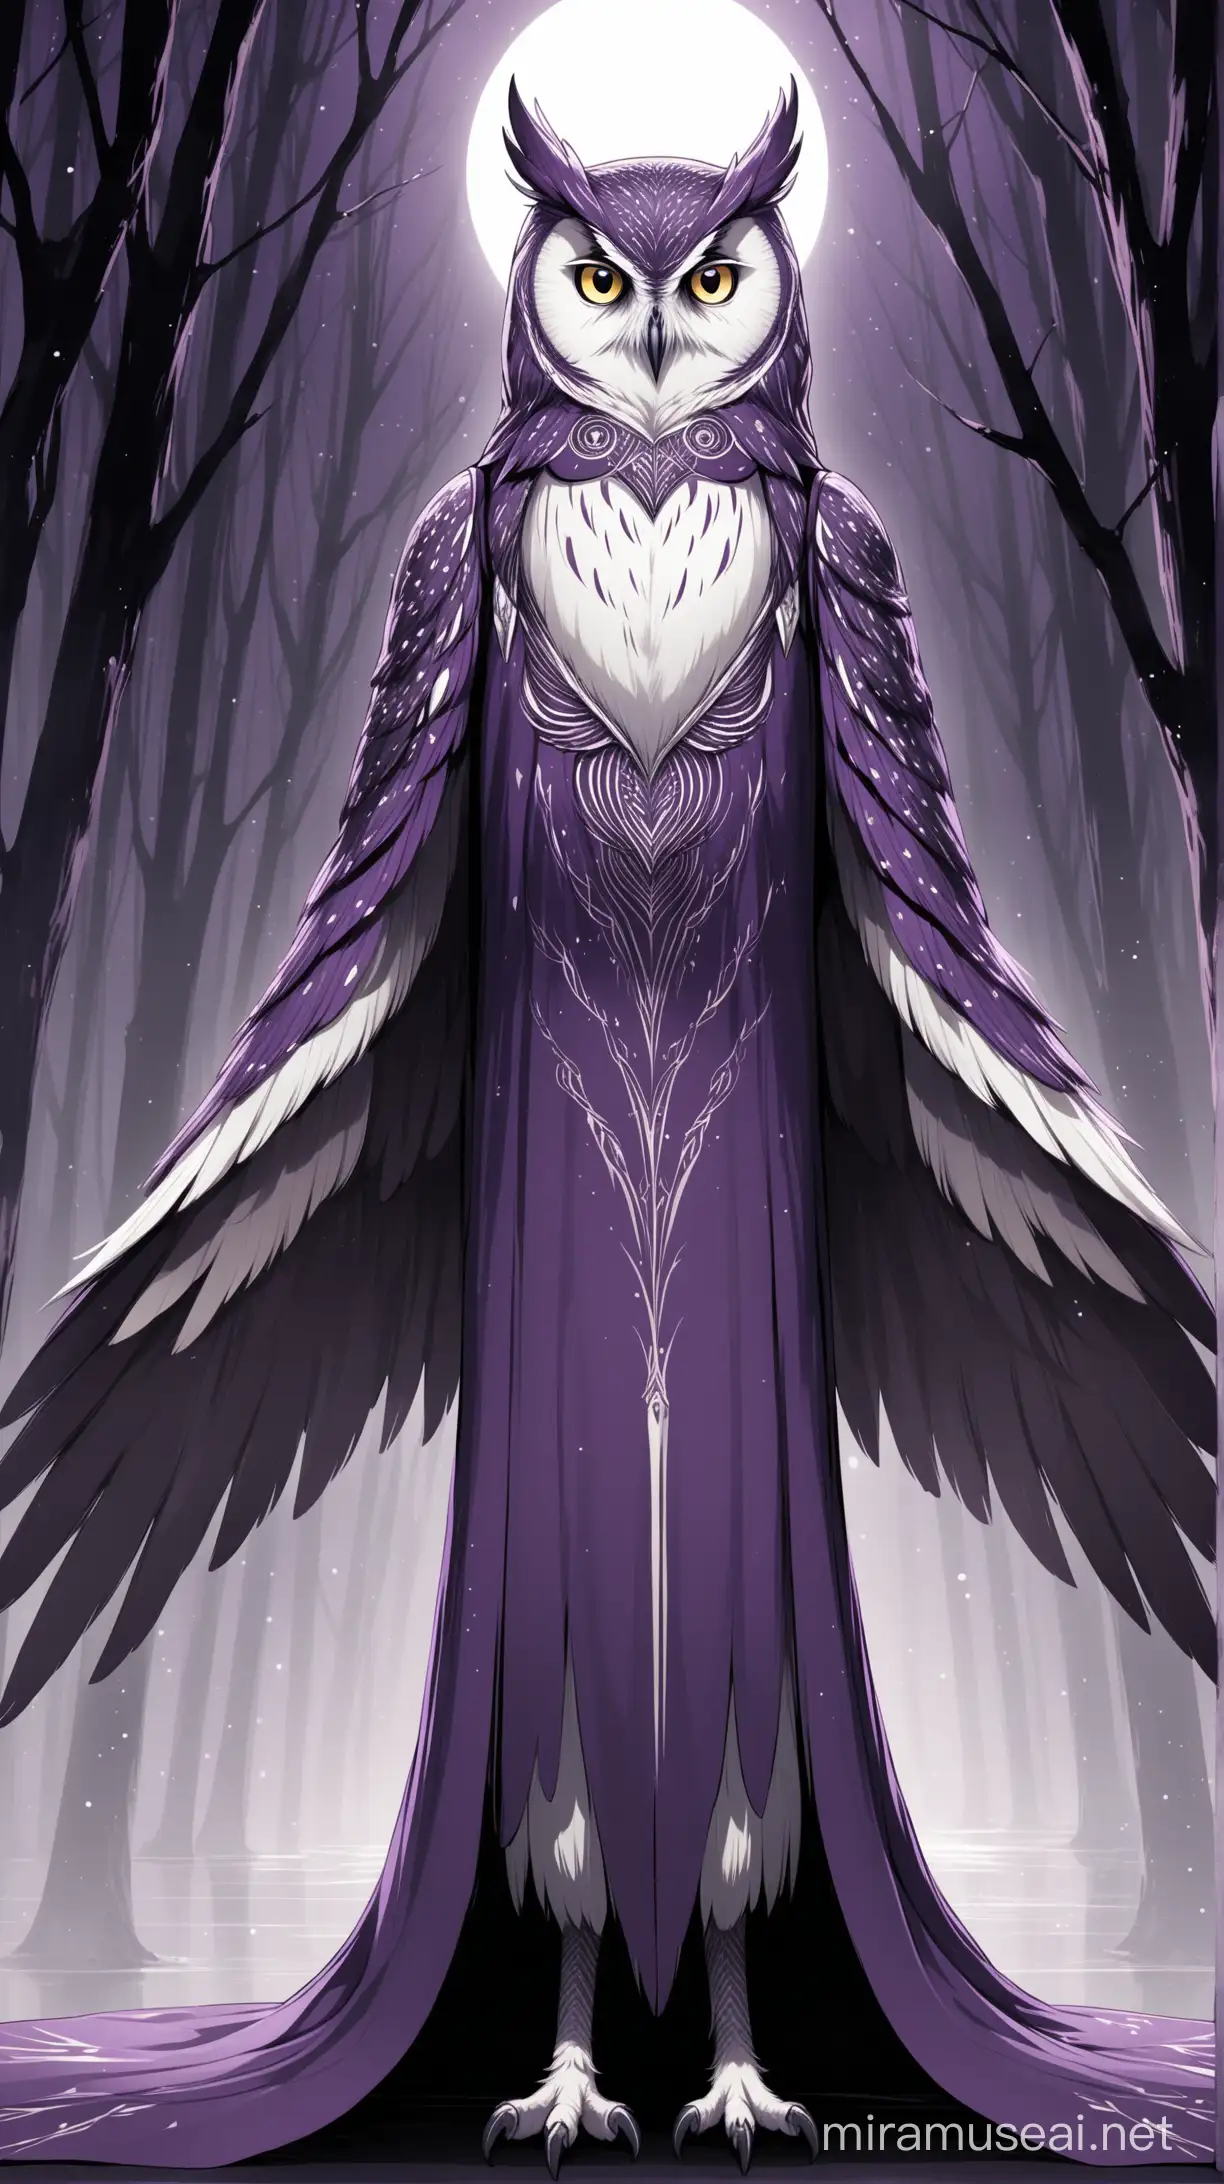 Slender anthropomorphic owl, with white features, wearing opulent purple and grey robes 